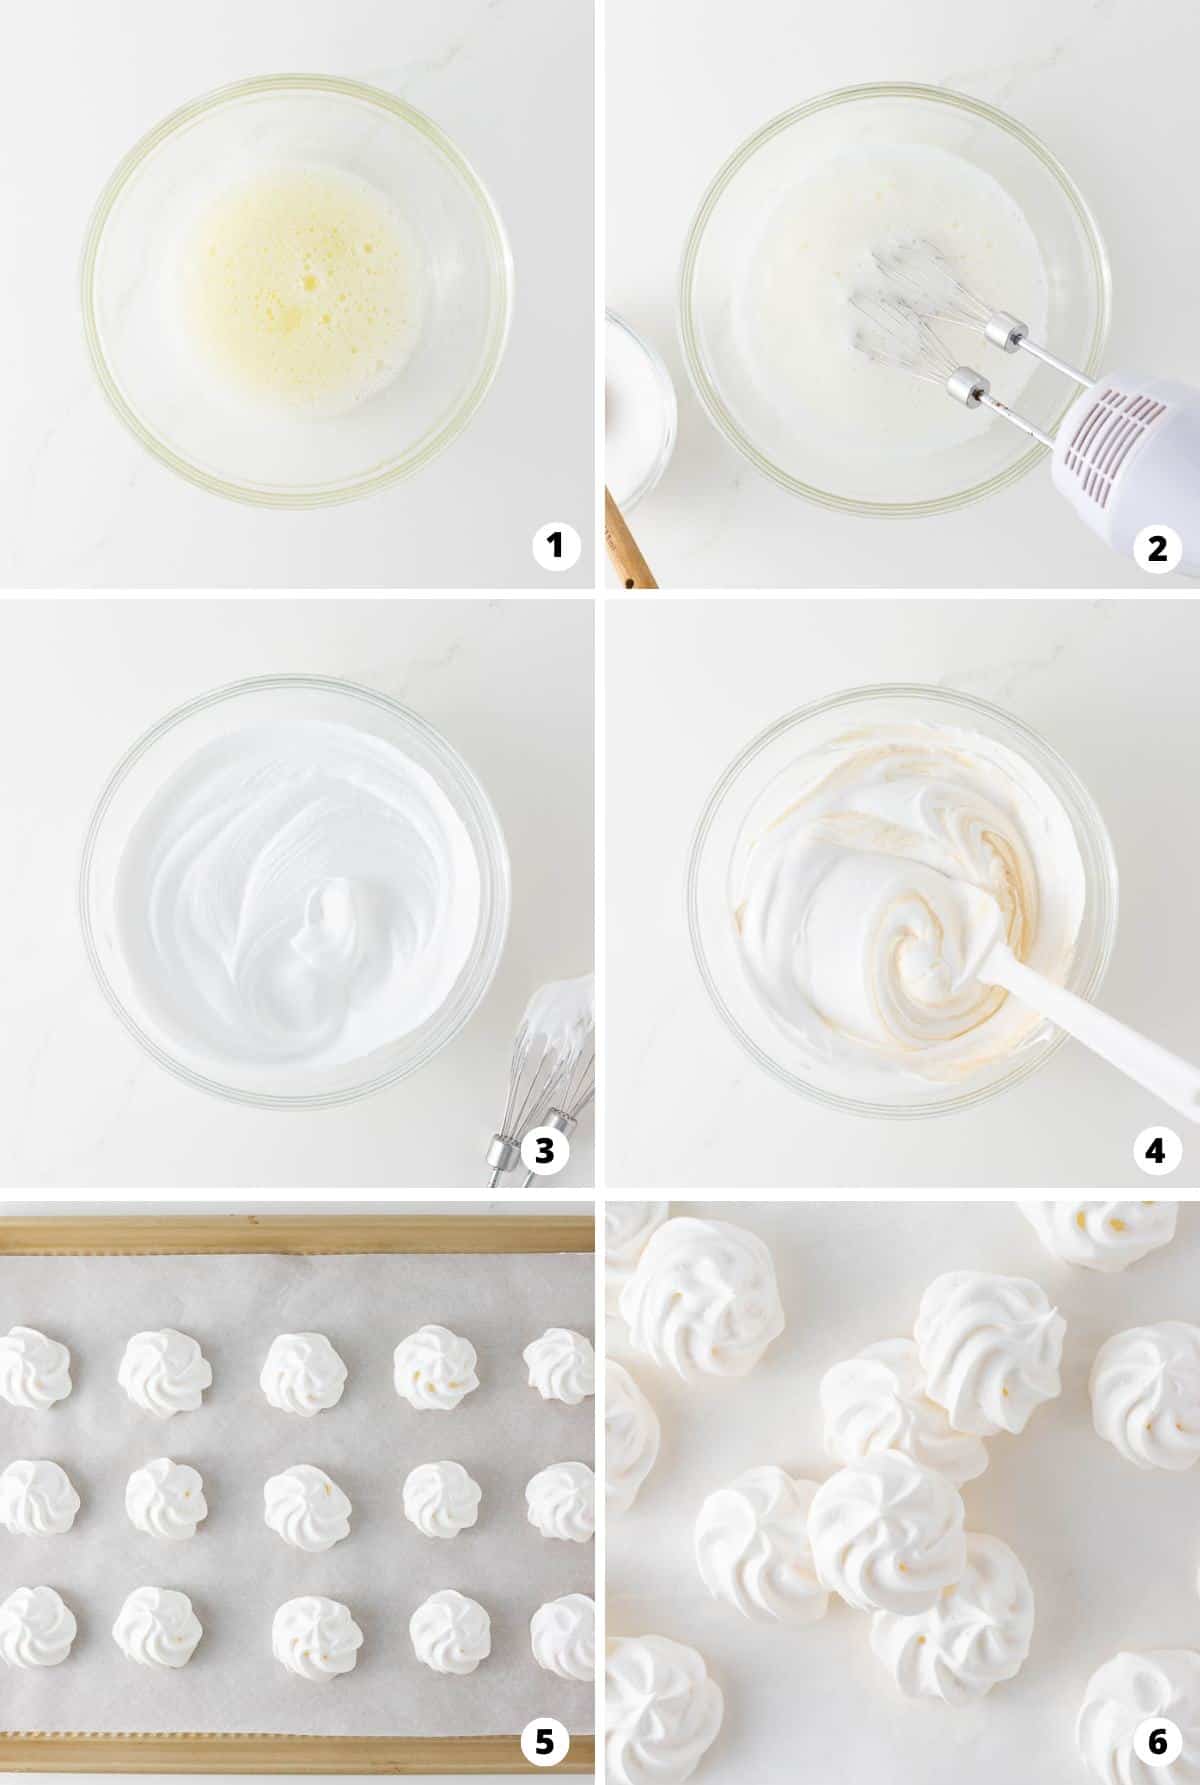 Showing how to make meringue cookies in a 6 step collage.